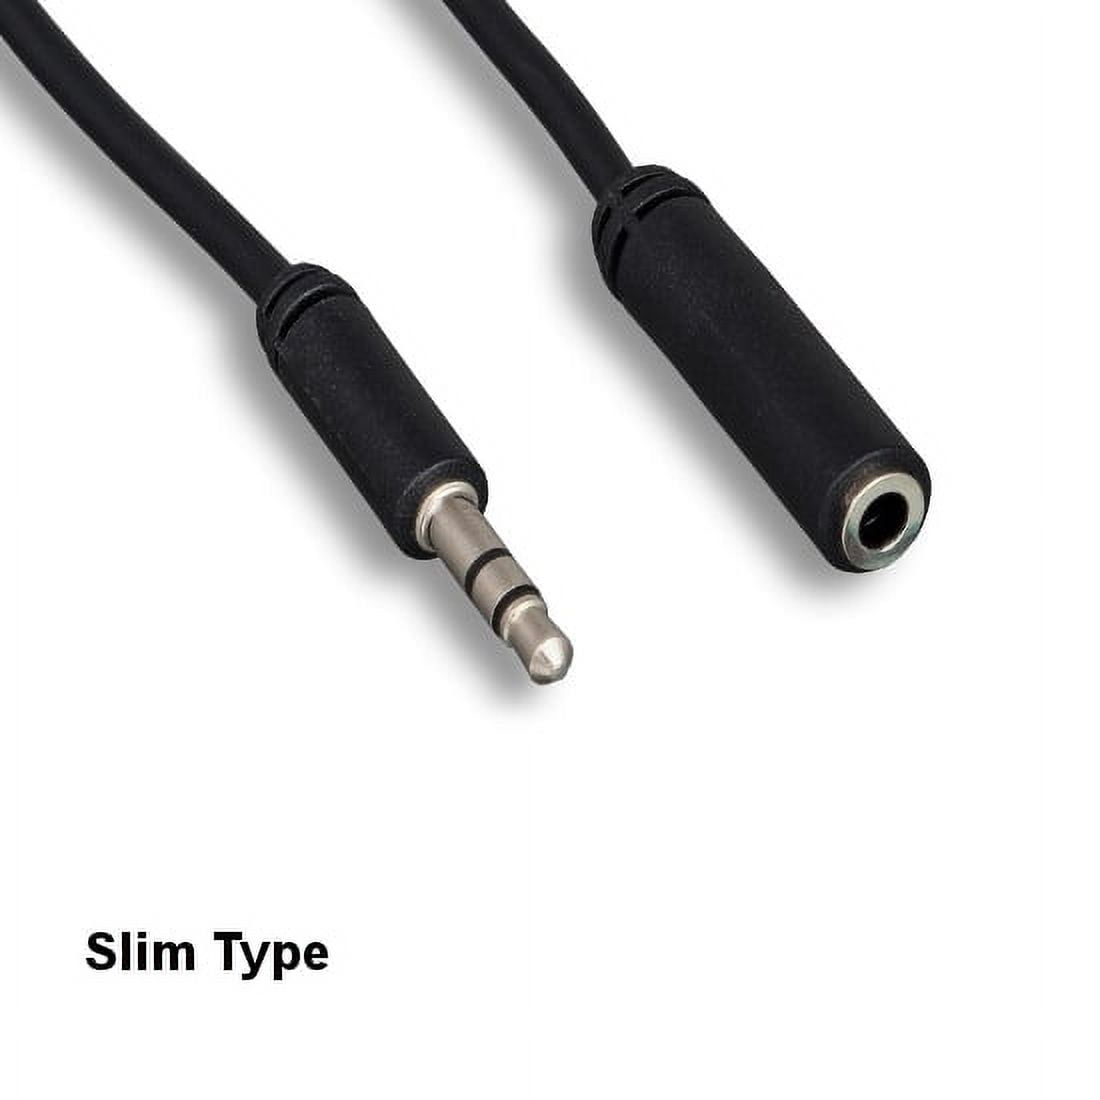 Belkin Mini-Stereo Audio Cable for Smartphones, Tablets, and MP3 Players,  3.5mm Jack (6-Foot)